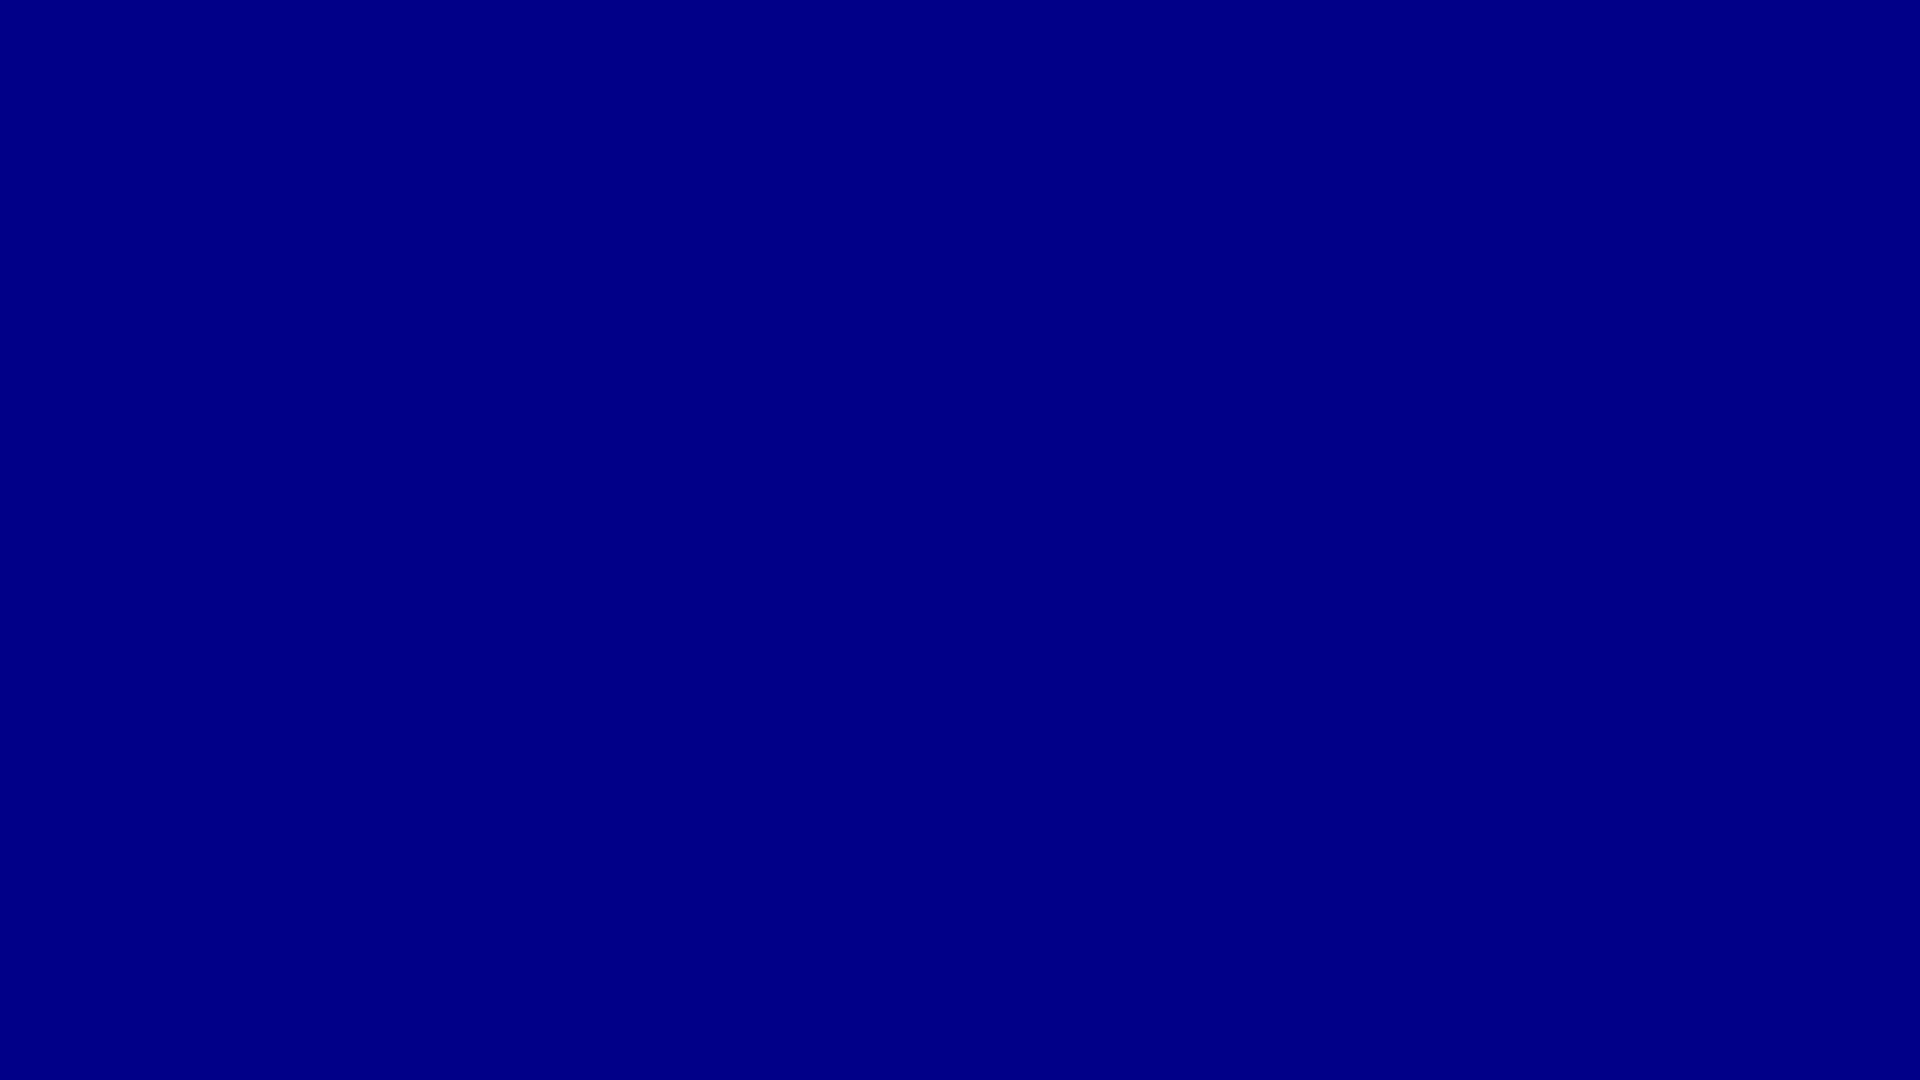 Solid Prussian Blue Background